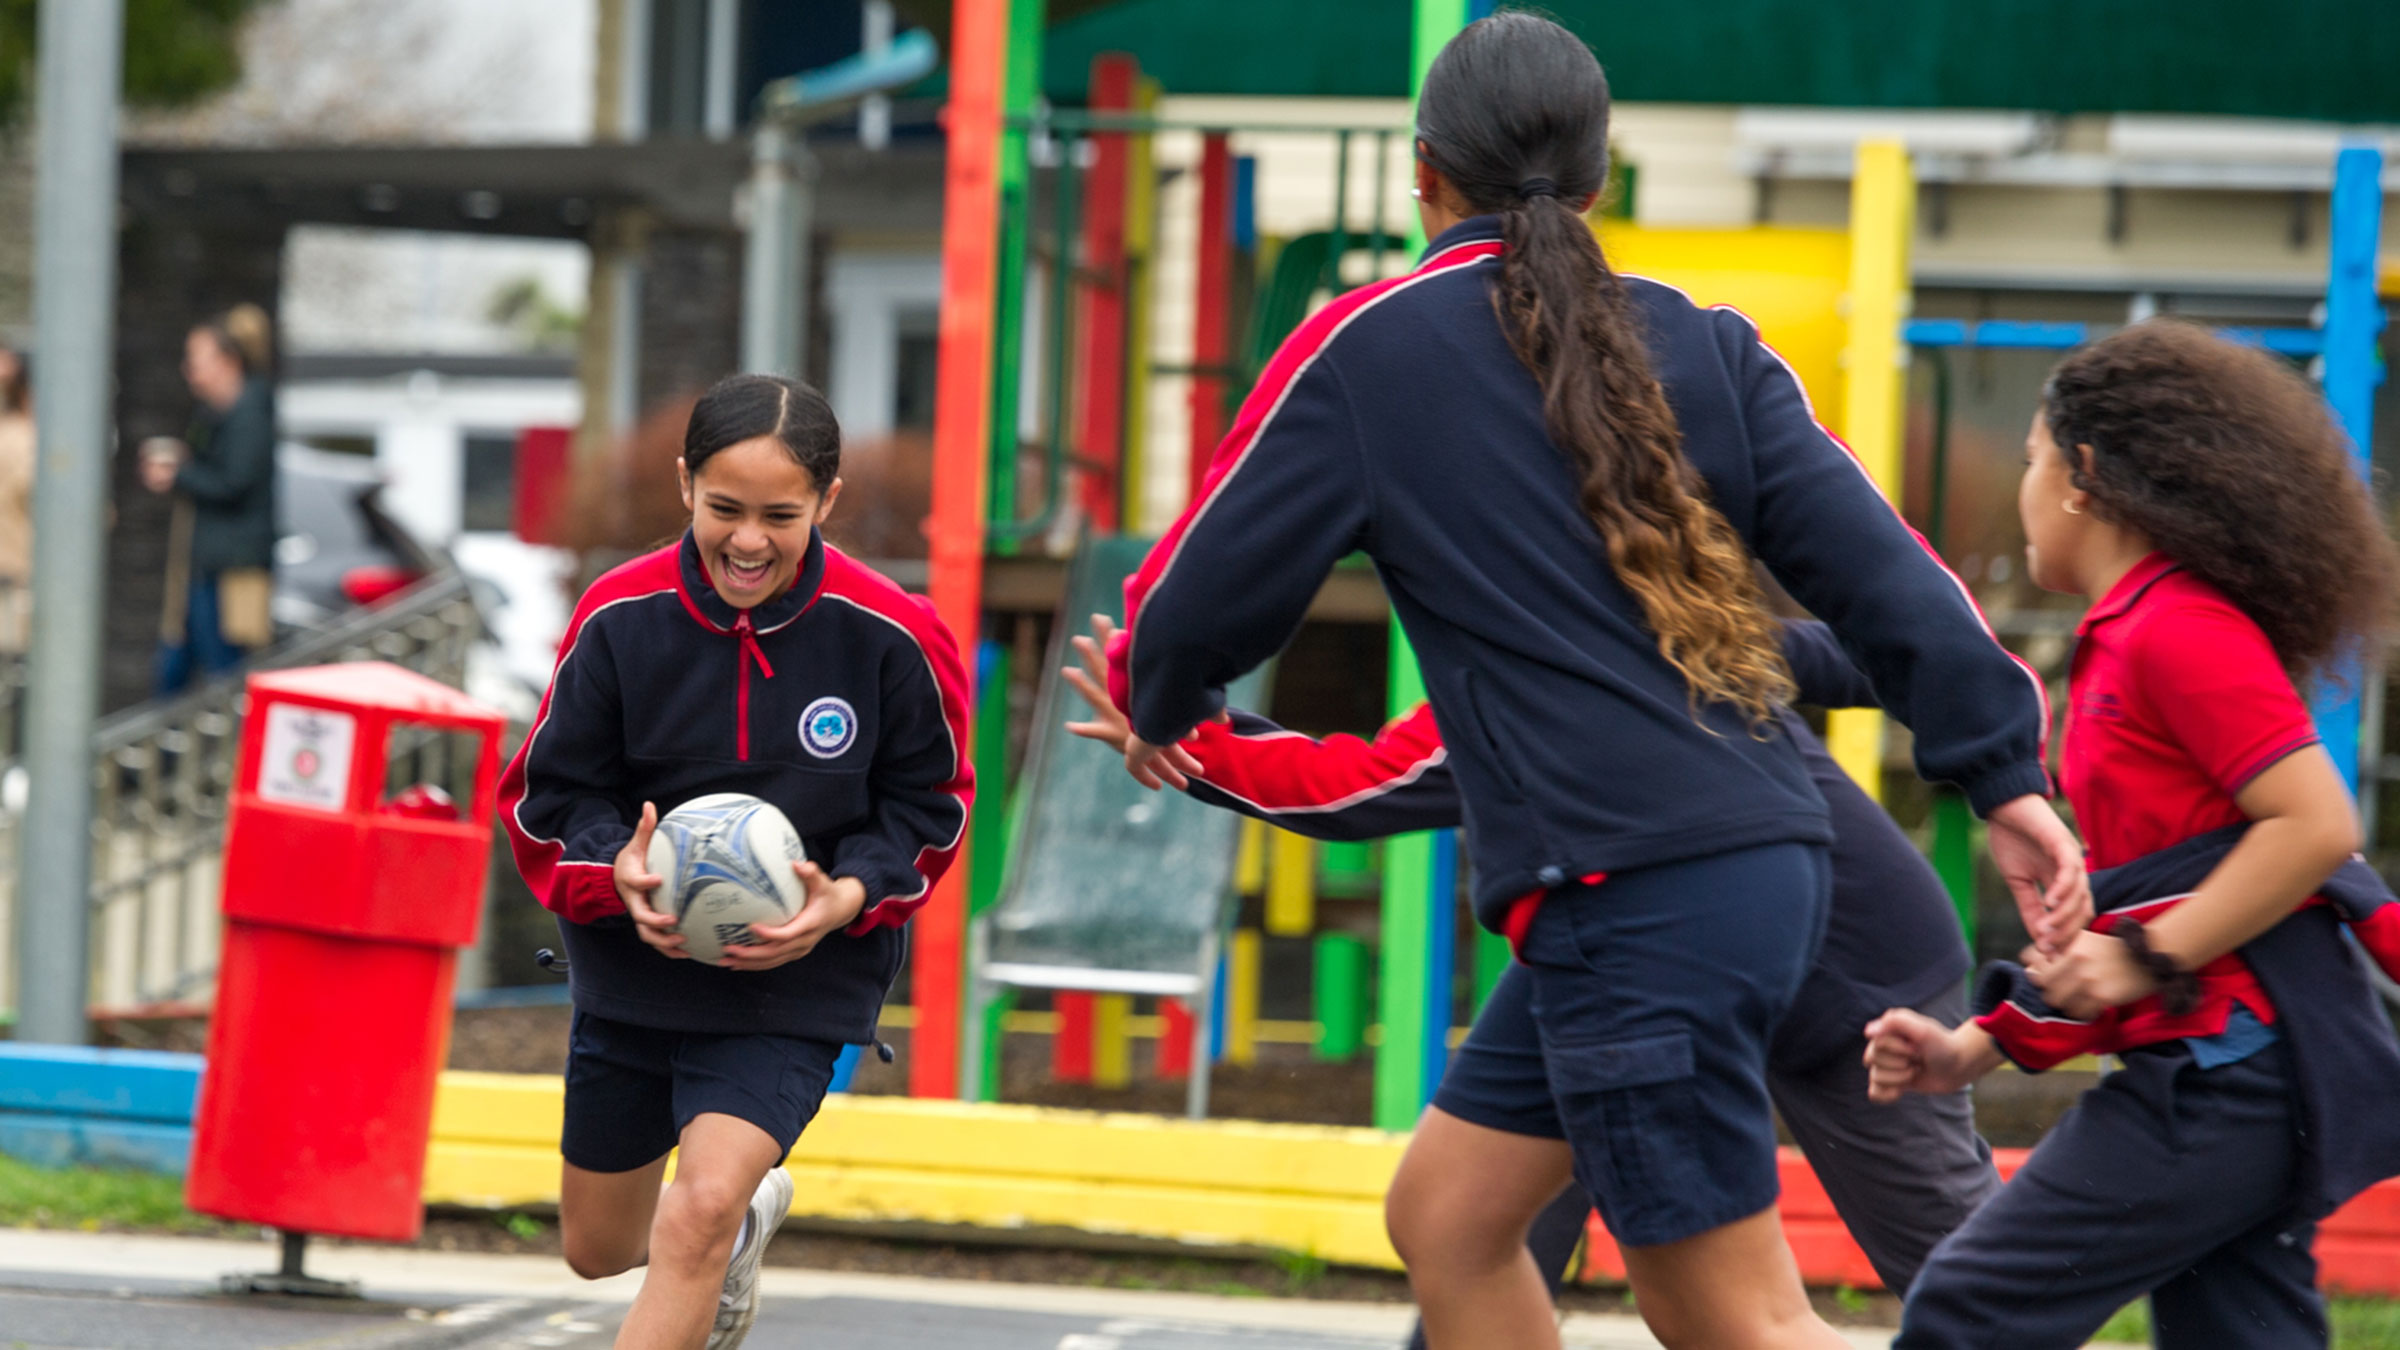 A girl running with a rugby ball towards a group of students